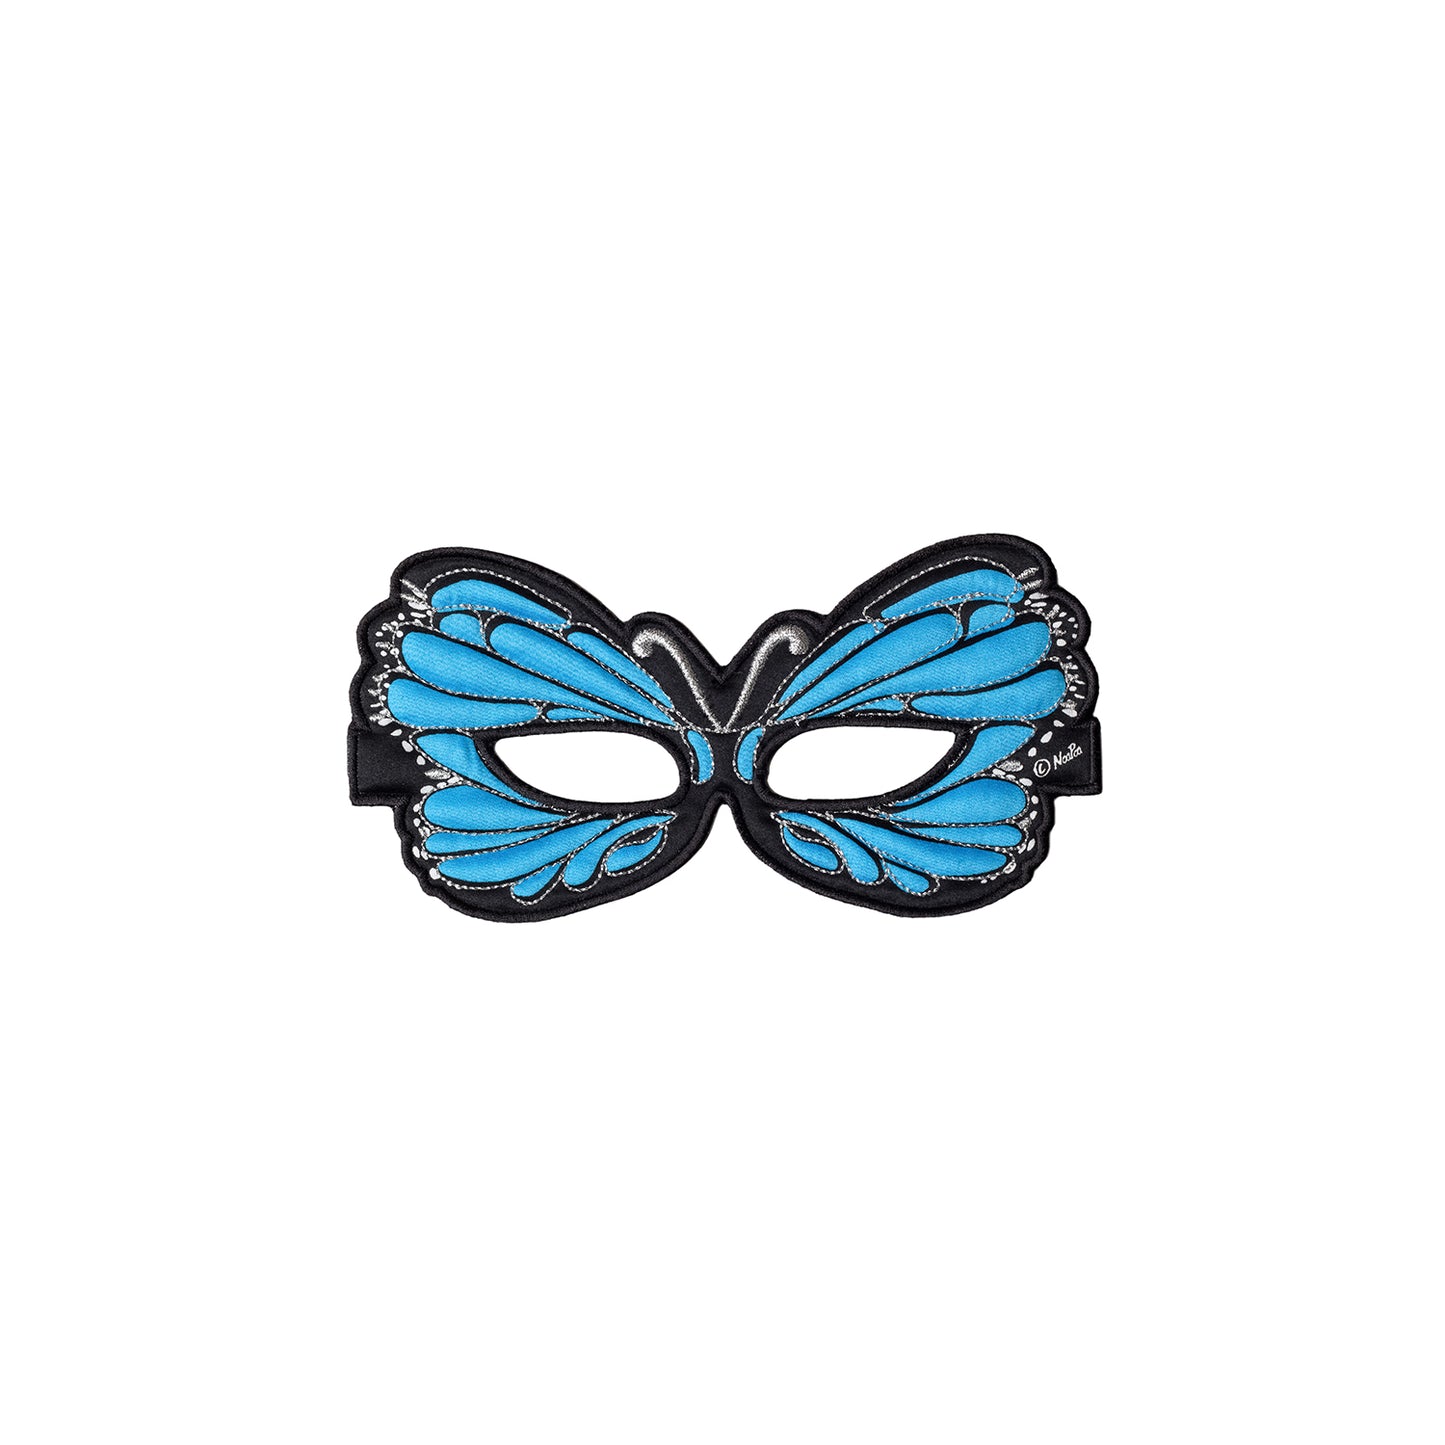 BUTTERFLY MASK in eco-friendly cotton gift bag